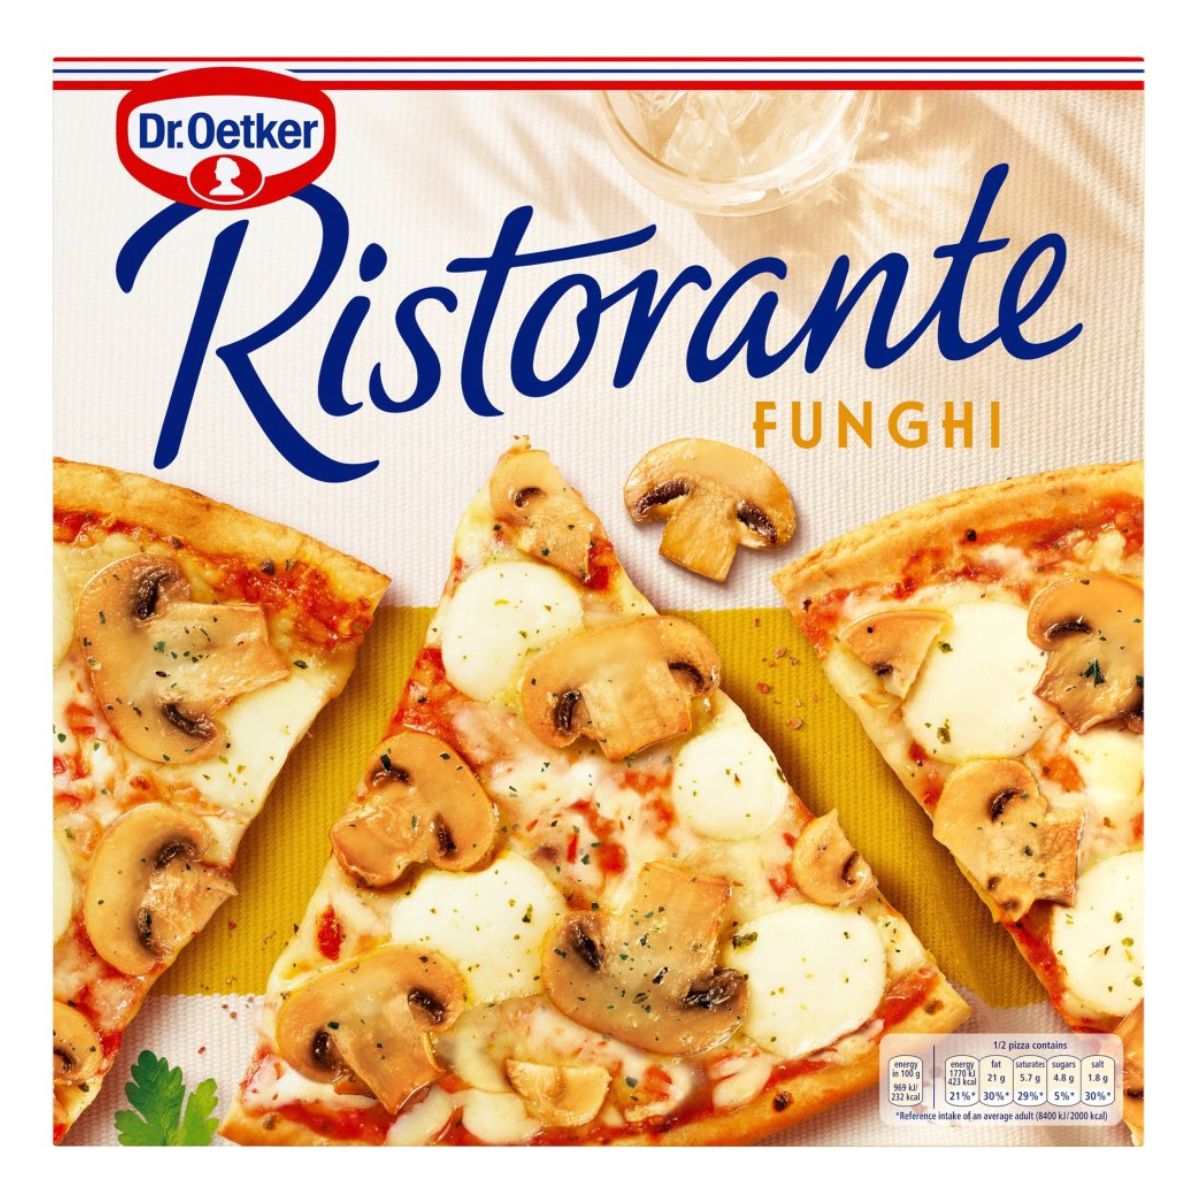 A box of Dr. Oetker - Ristorante Funghi Pizza - 365g with mushrooms on it.